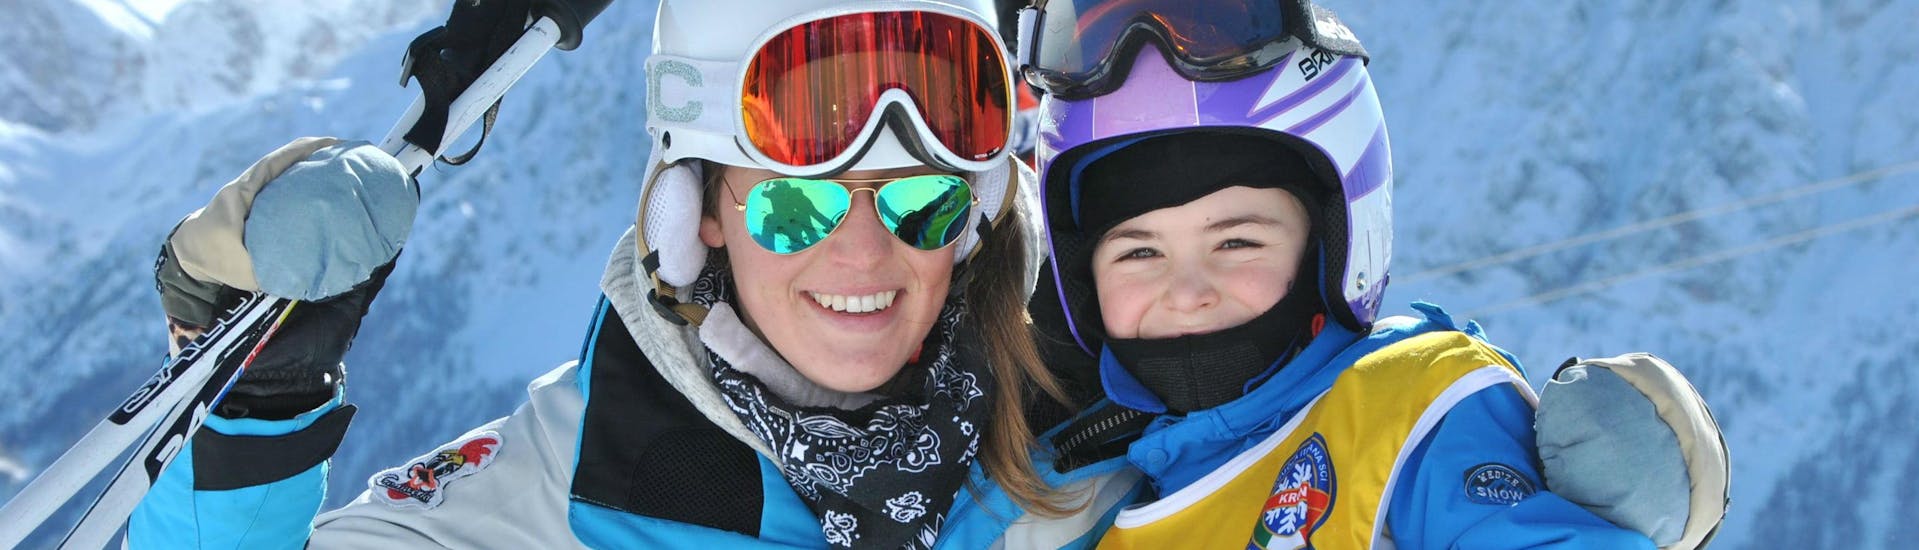 Private Ski Lessons for Kids of All Ages with Kronschool Valdaora - Hero image